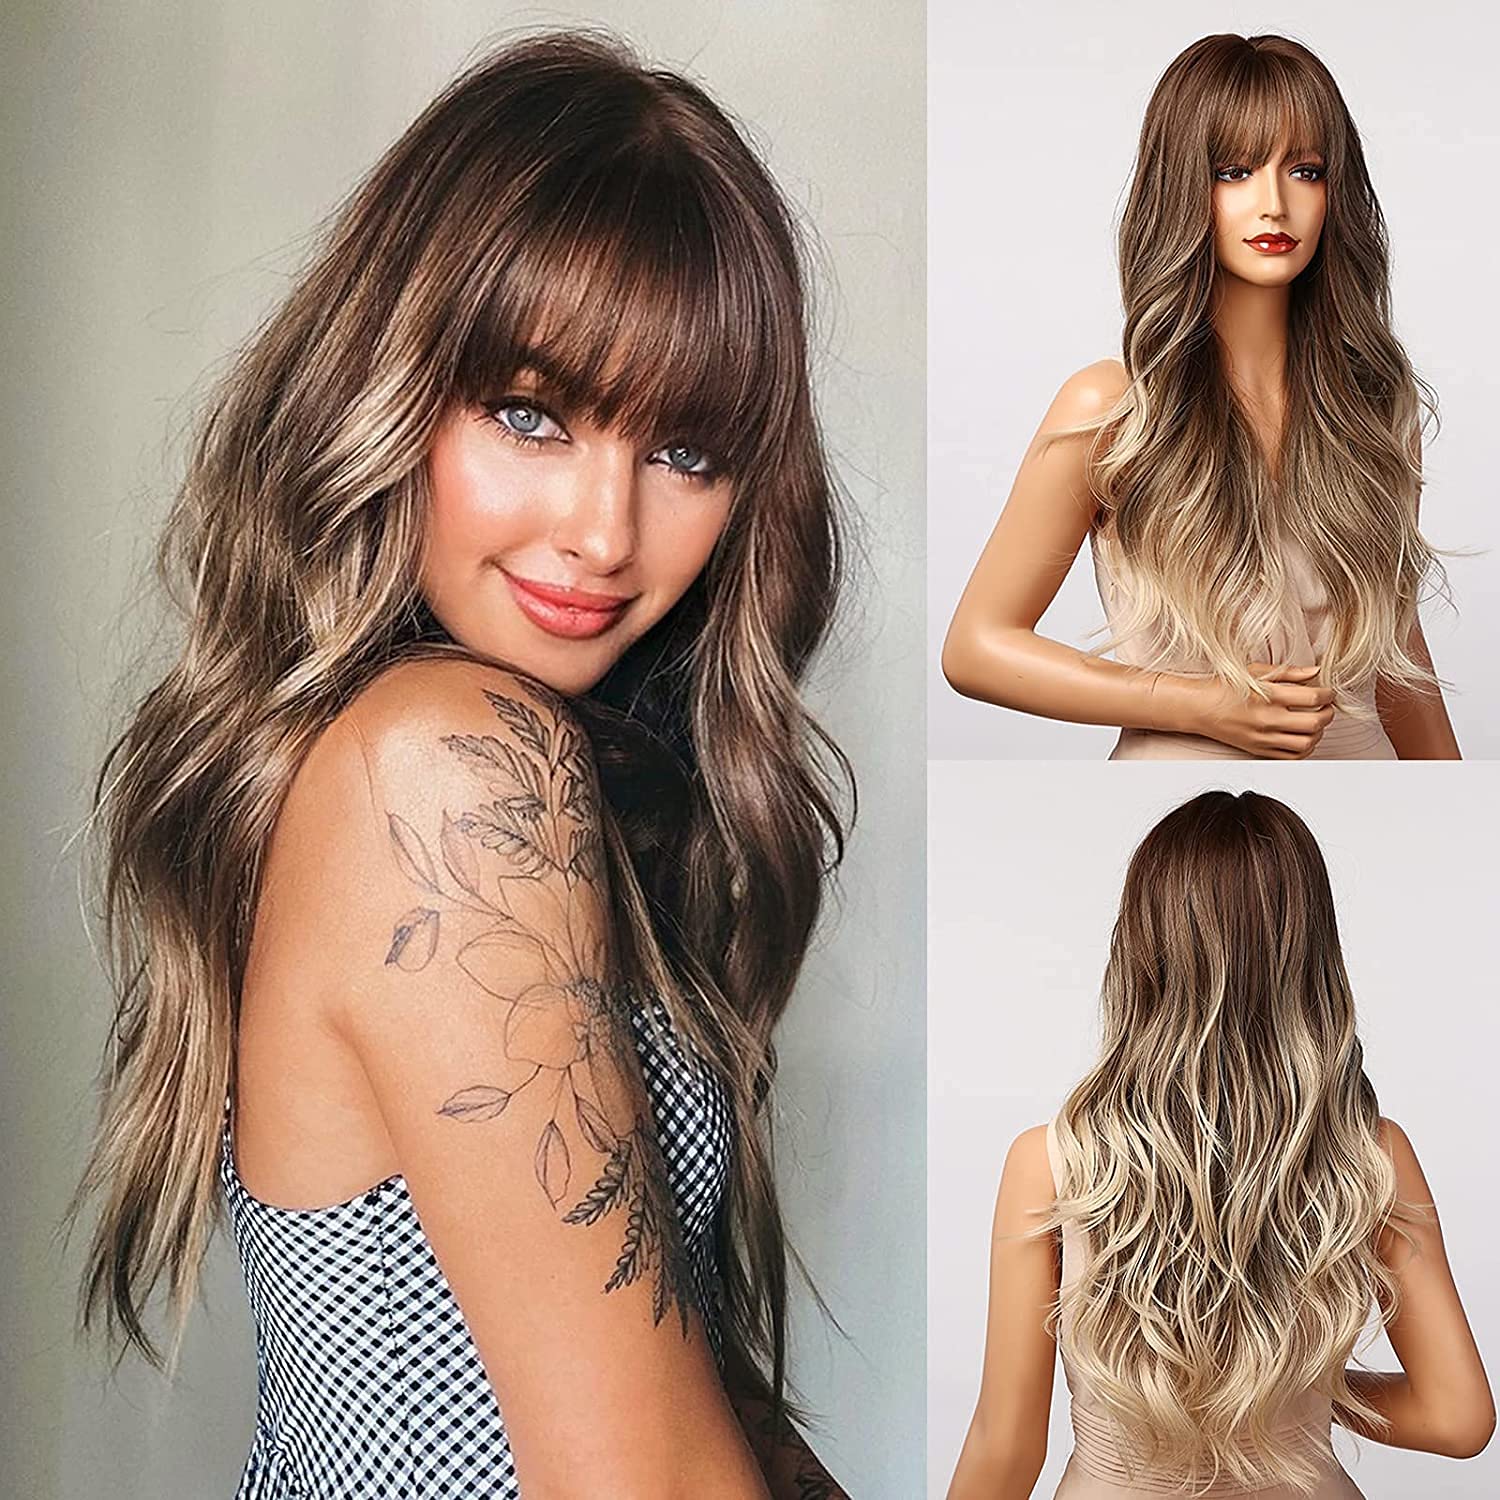 Honygebia Light Brown Wig with Bangs - Long Ombre Wavy Wigs for White Women, Ash White Synthetic Heat Resistant Hair, Natural Be